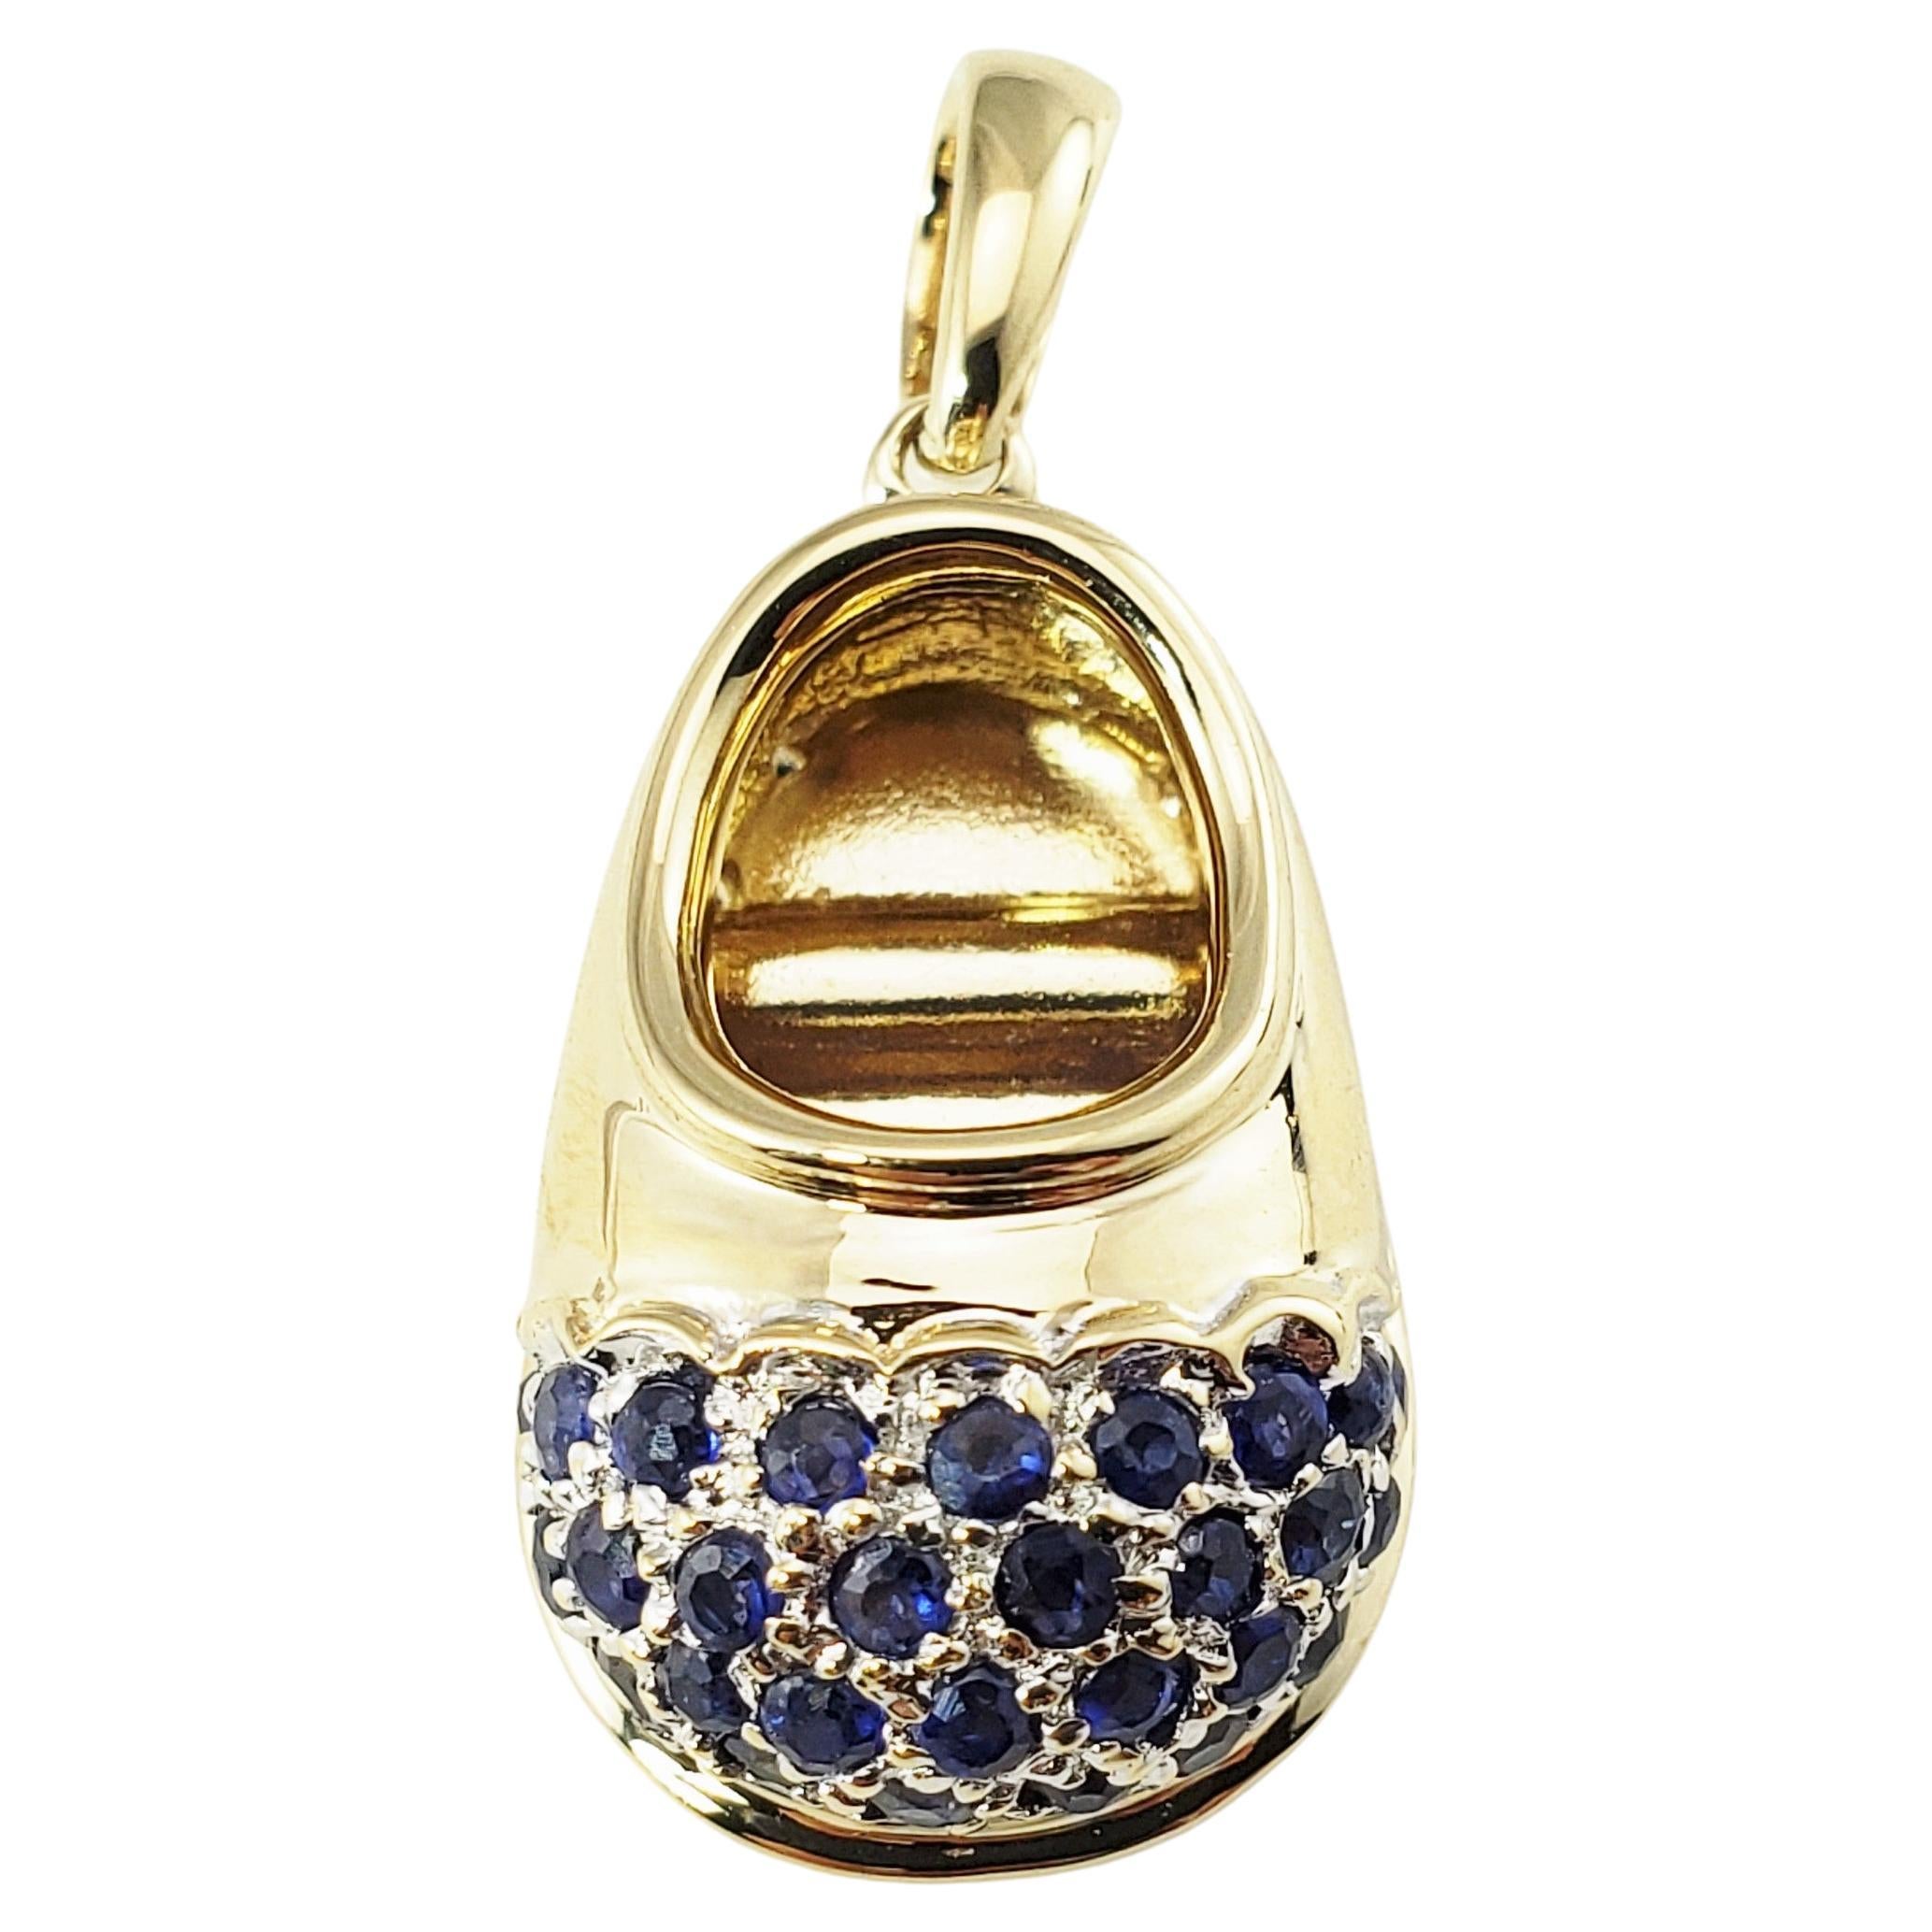 Vintage 14 Karat Yellow Gold and Sapphire Baby Shoe Charm